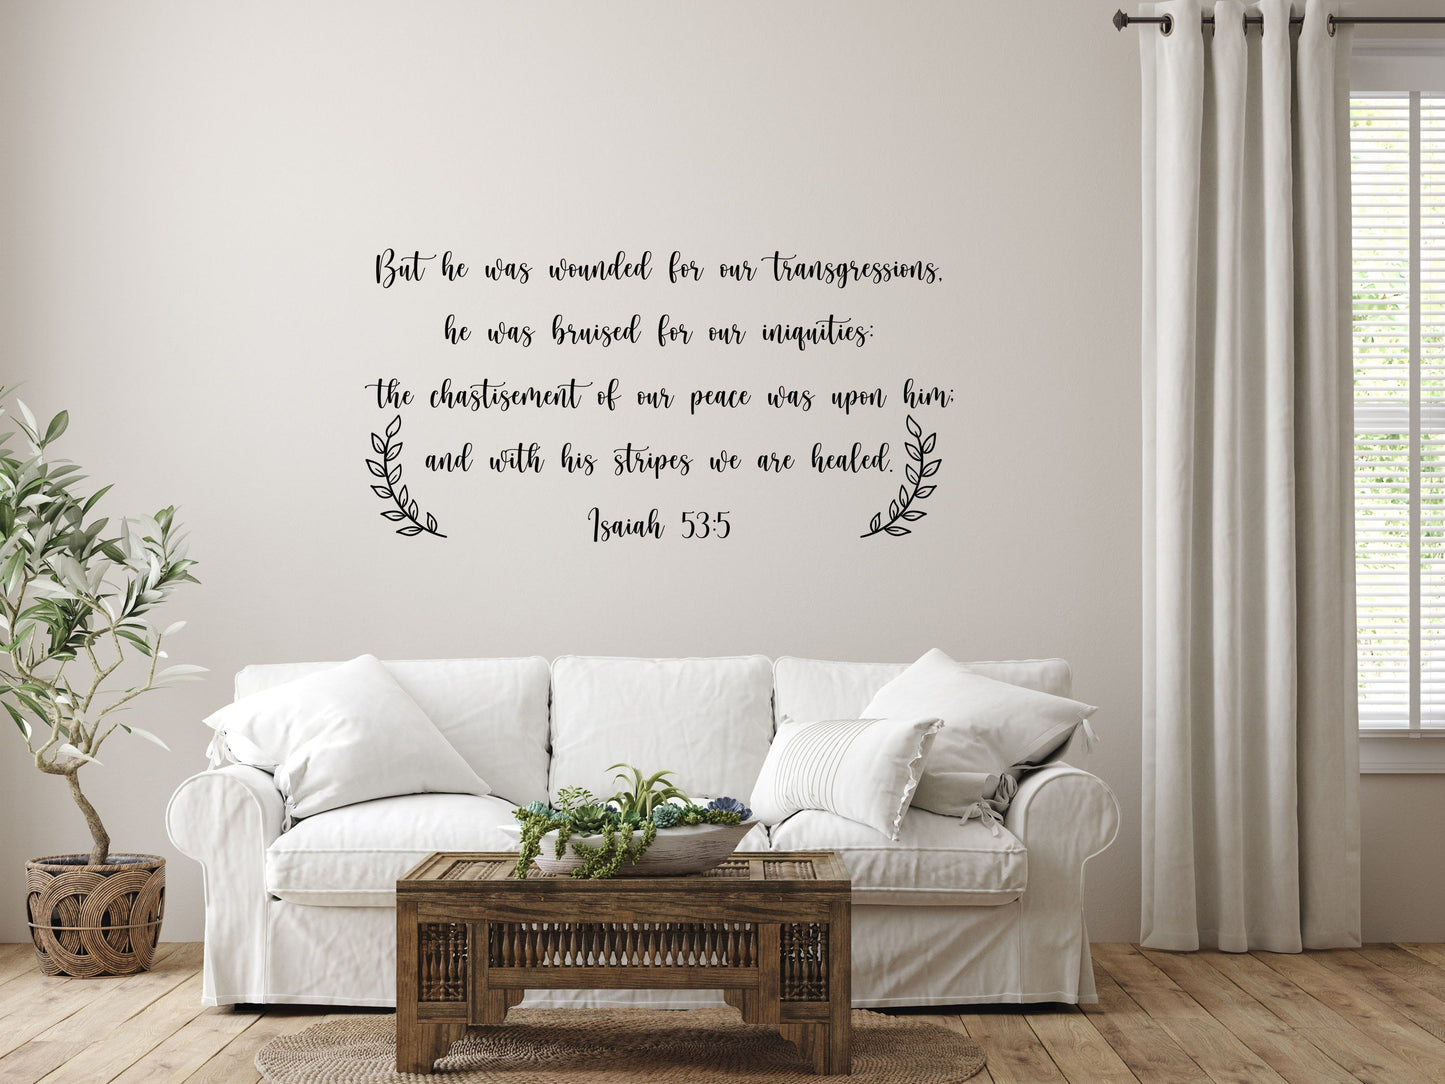 Isaiah 53:5 Scripture Wall Decal - Christian Wall Sticker Quote - Christian Religious Decor- Wounded For Our Transgressions Done 